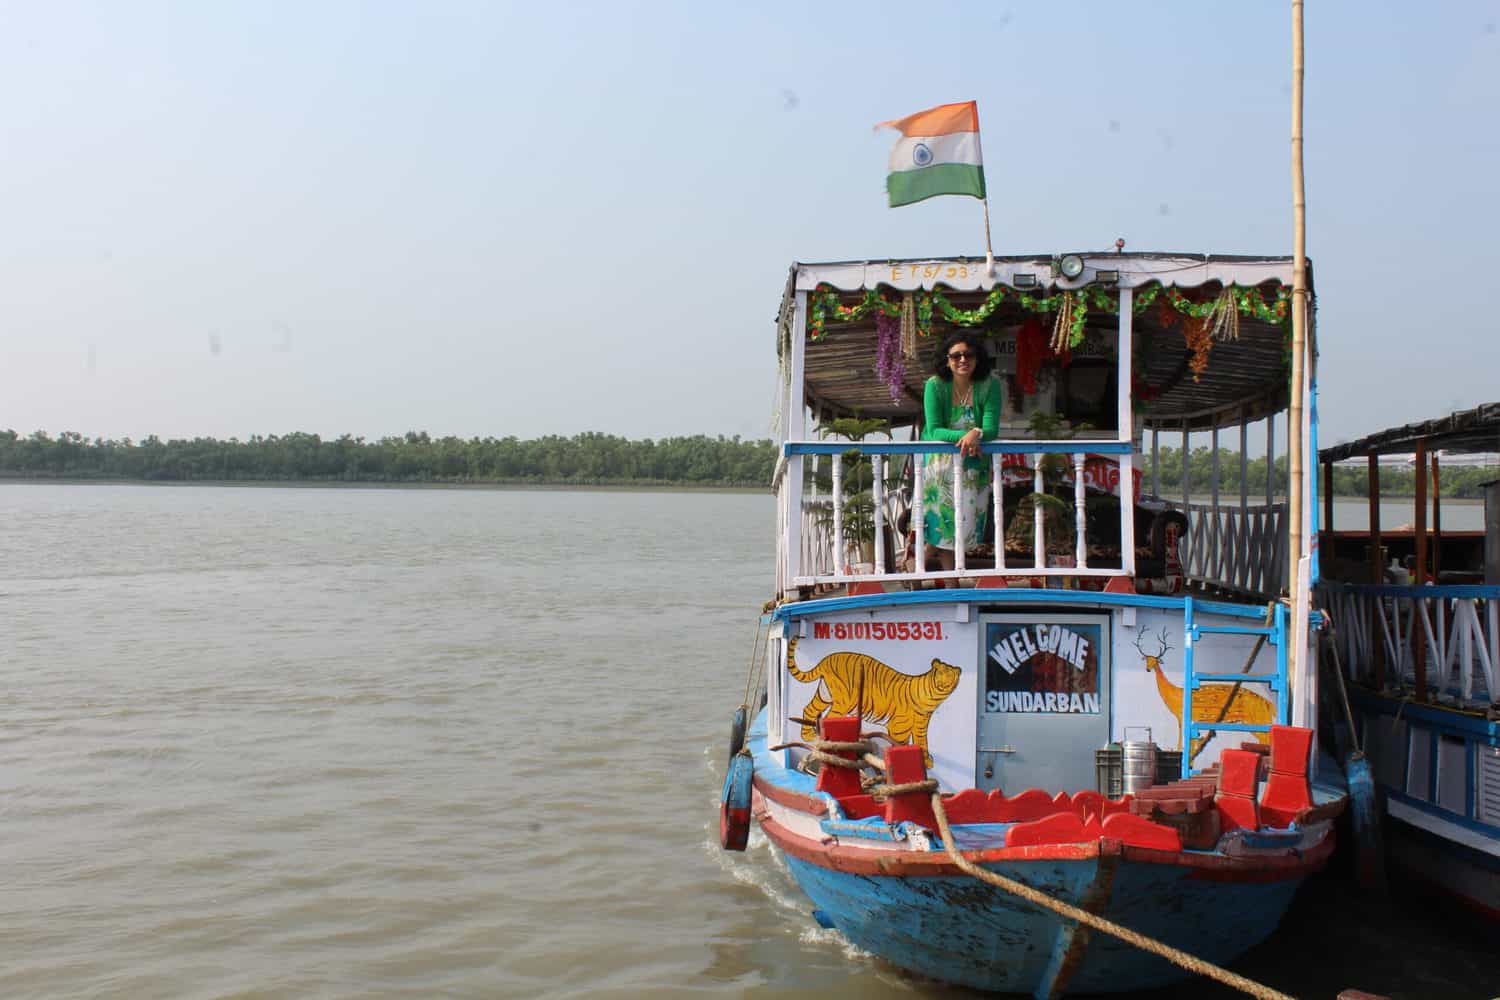 My boat in Sundarbans, West Bengal